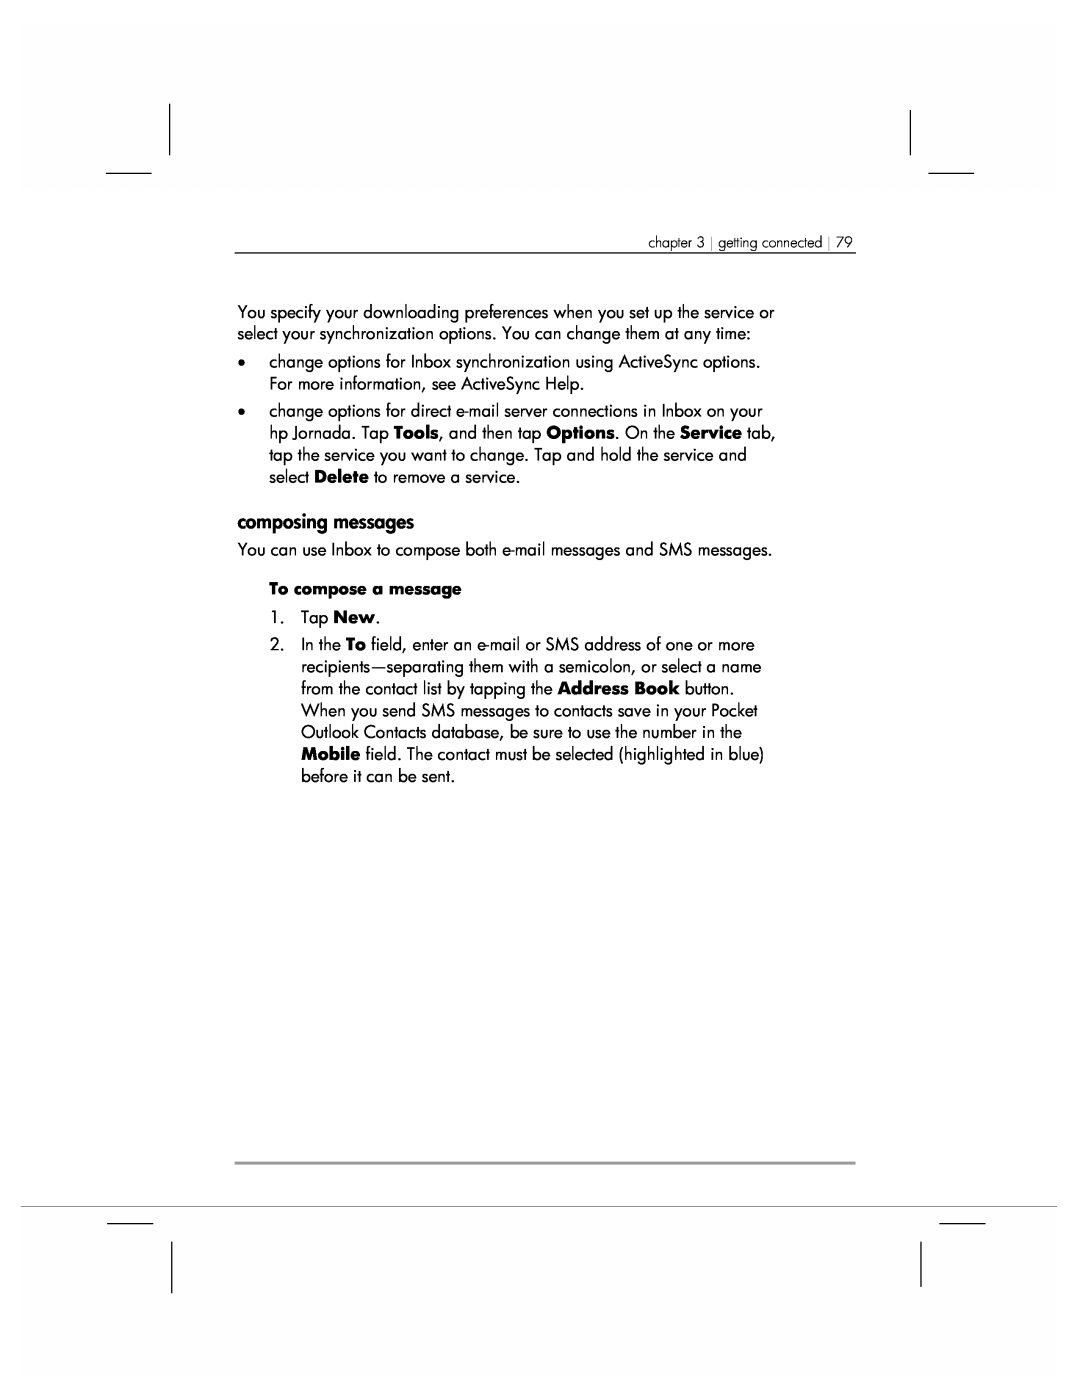 HP 920 manual composing messages 